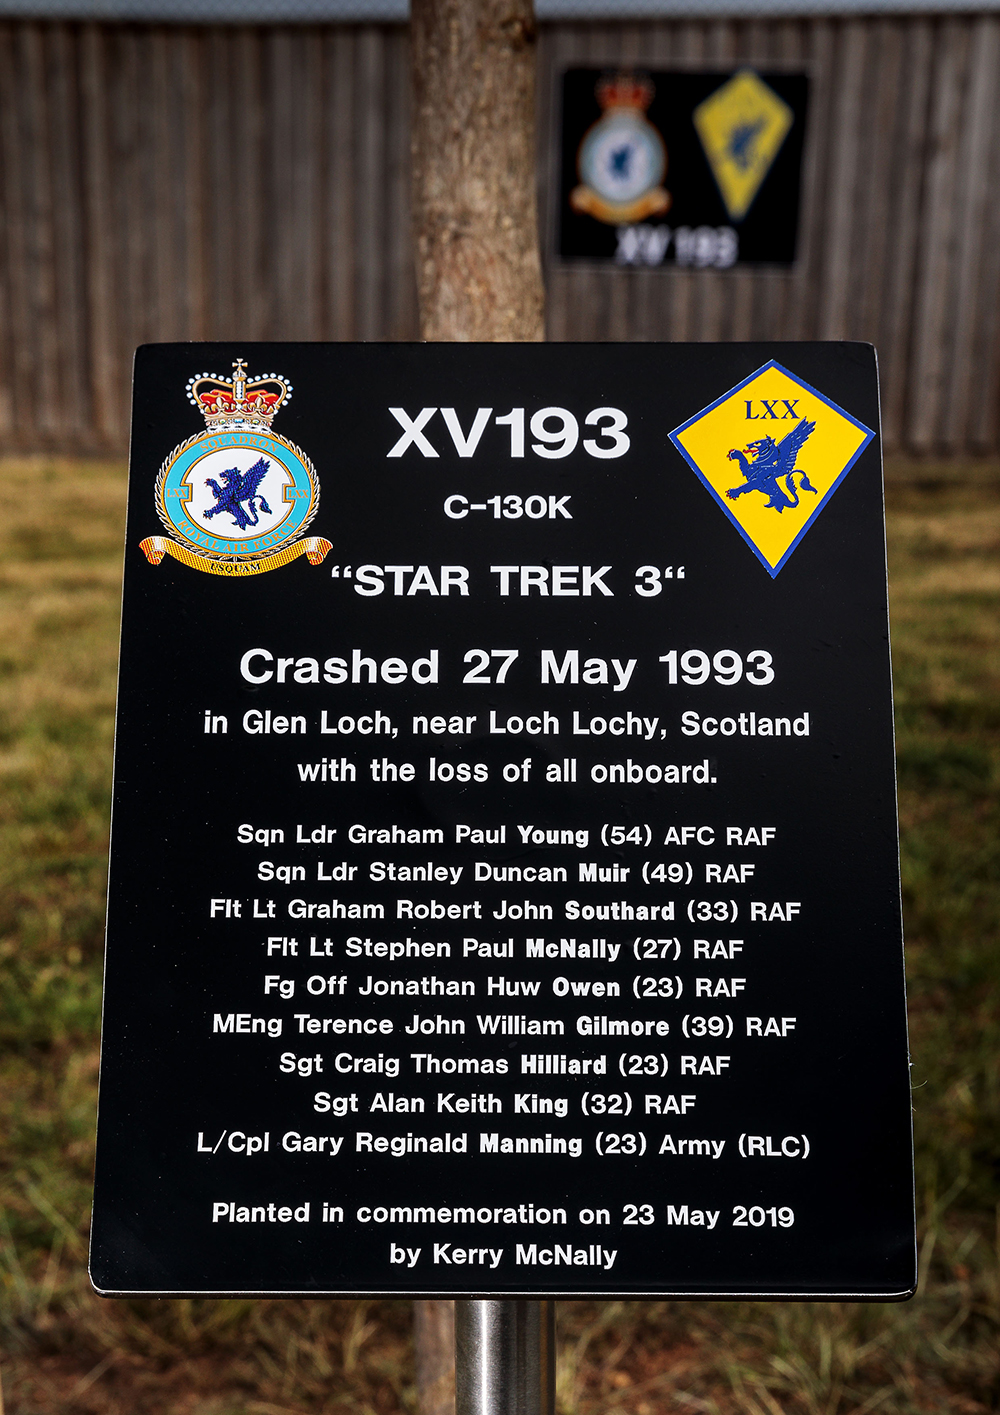 Number LXX (70) Squadron personnel, family and friends, remember the crew of XV193 who lost their lives in a fatal crash whilst training over Scotland in 1993.